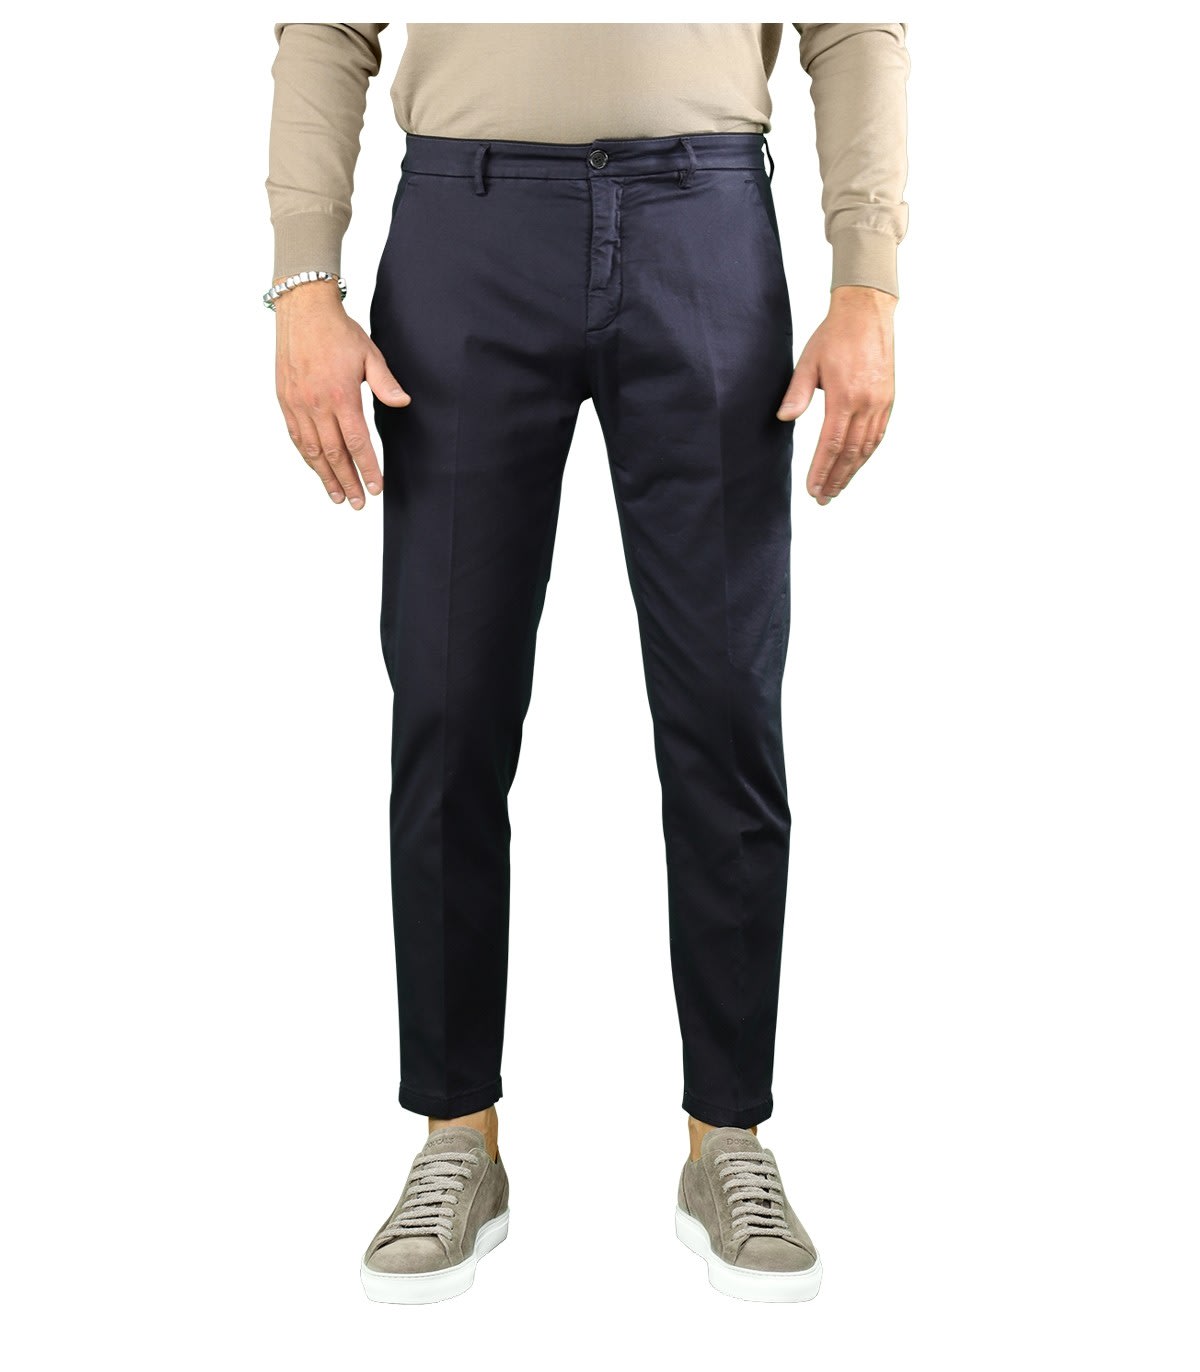 Department 5 Prince Navy Blue Chino Trousers